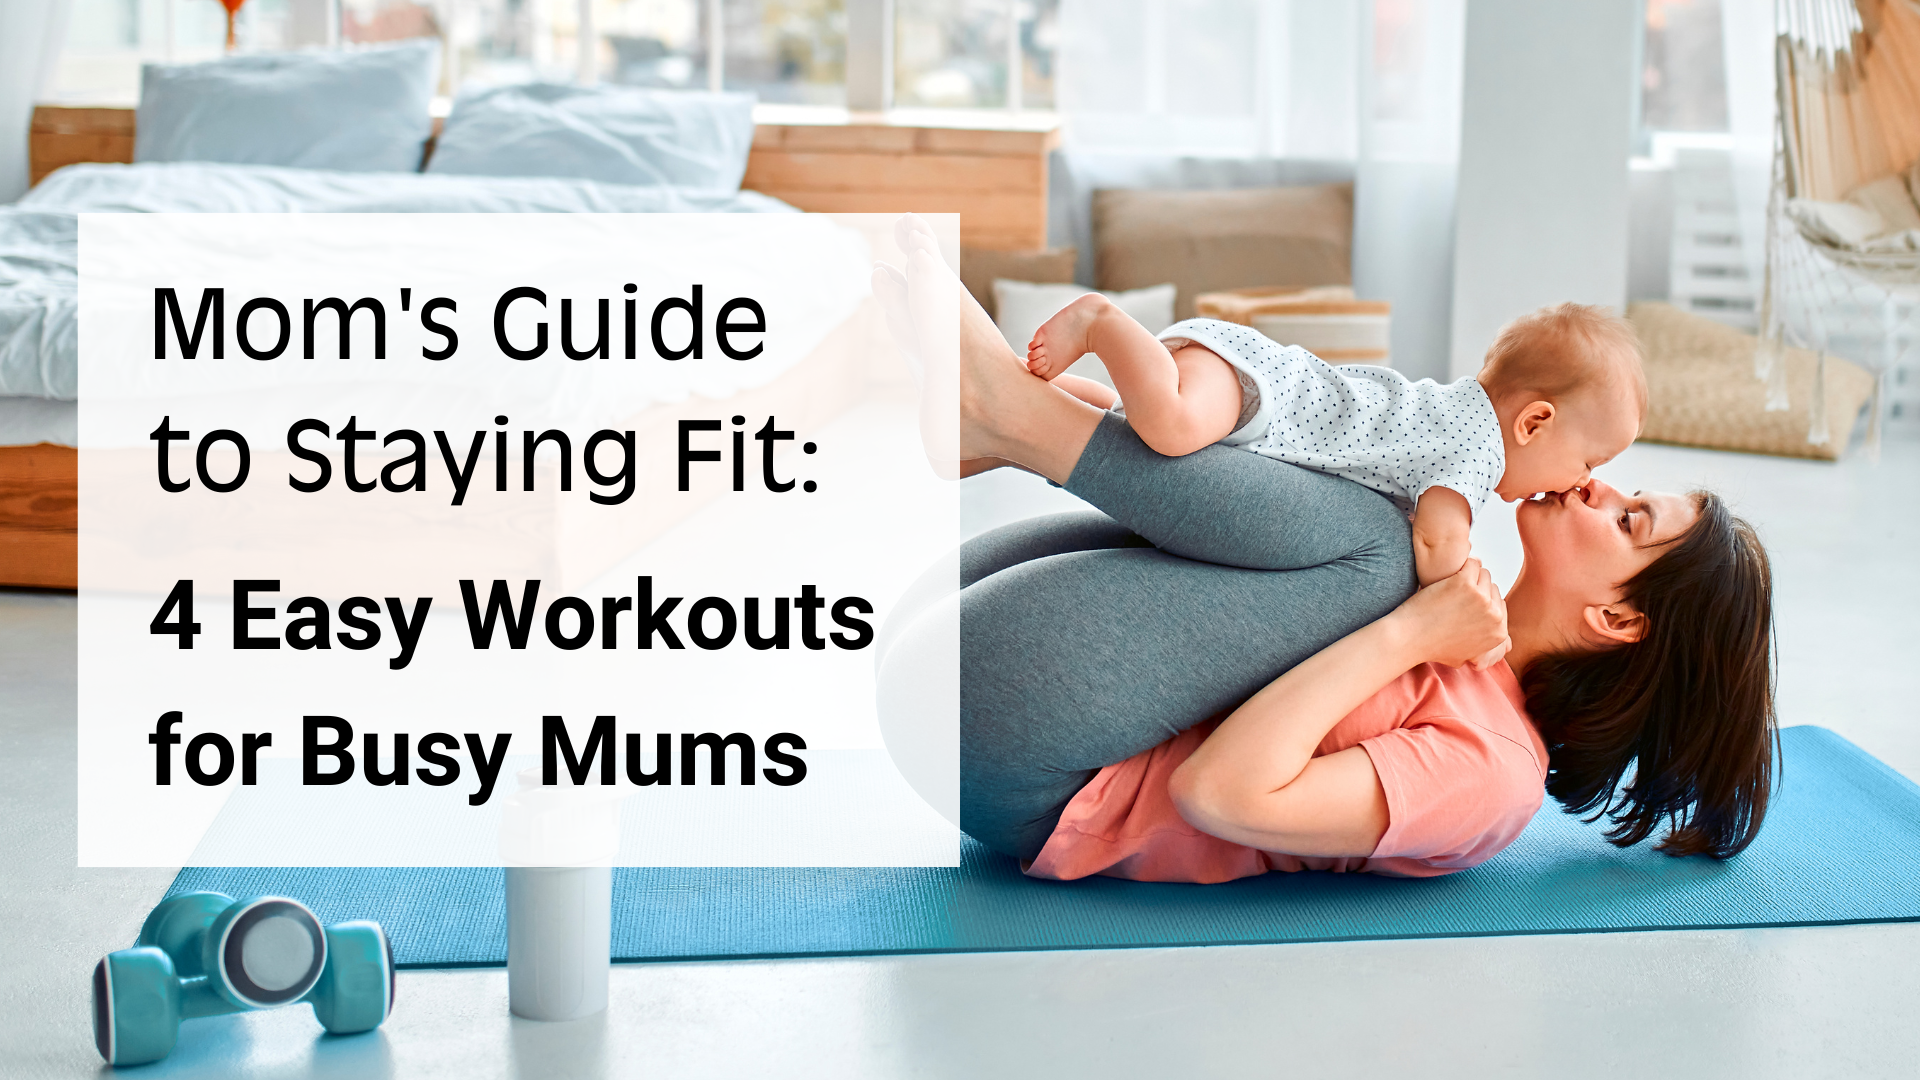 Easy workouts for busy moms